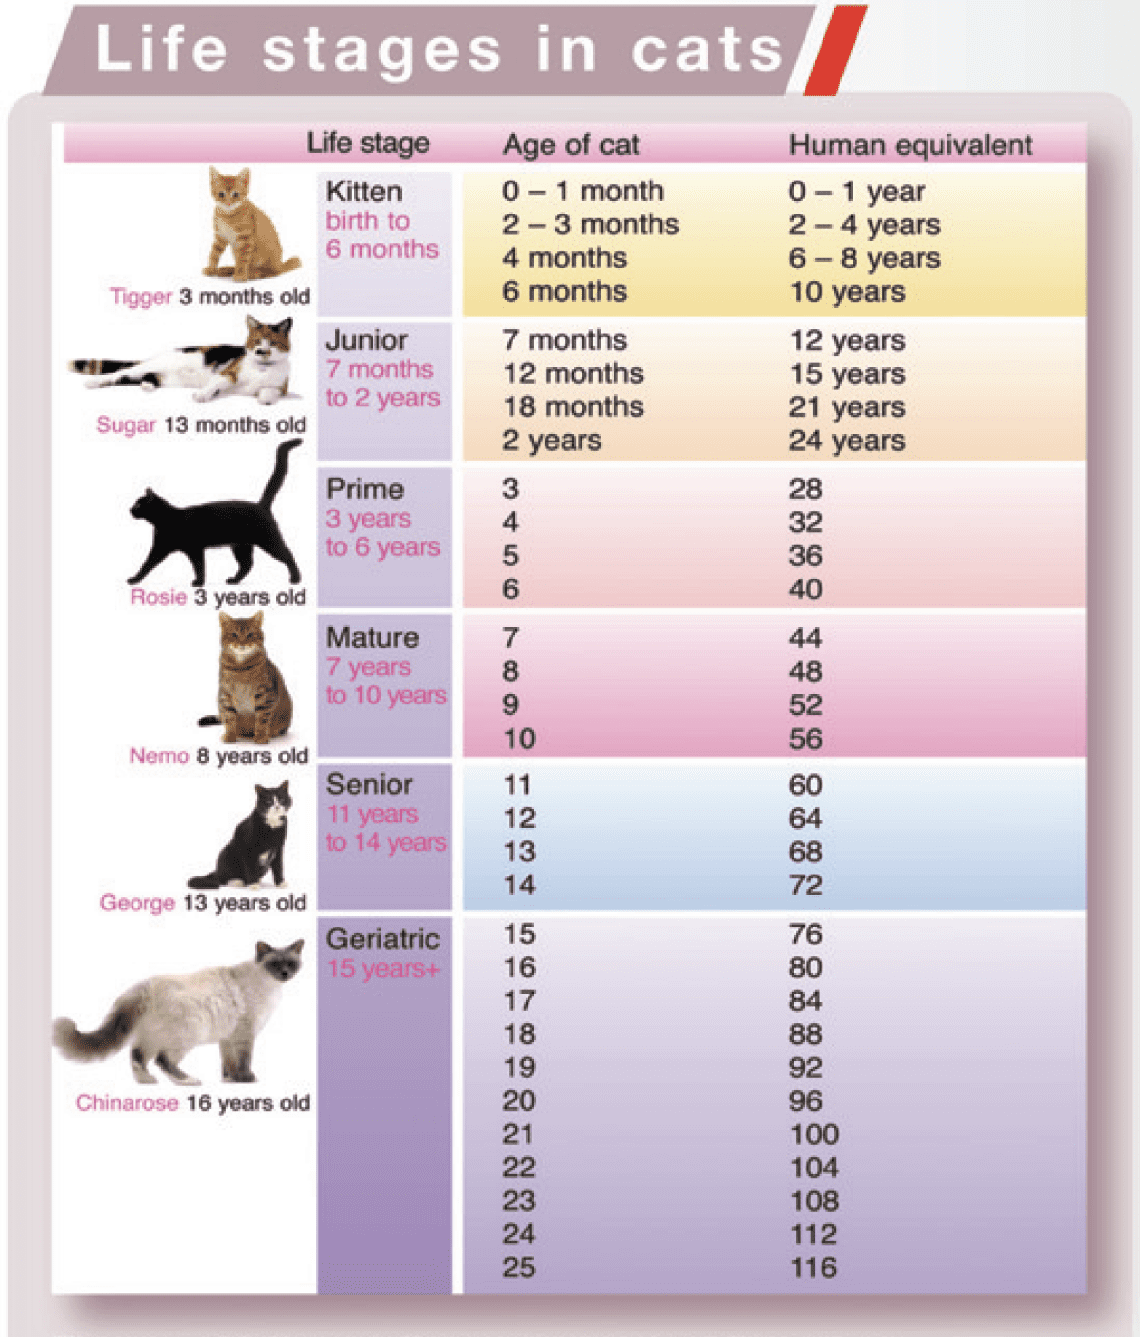 Six signs of aging in cats